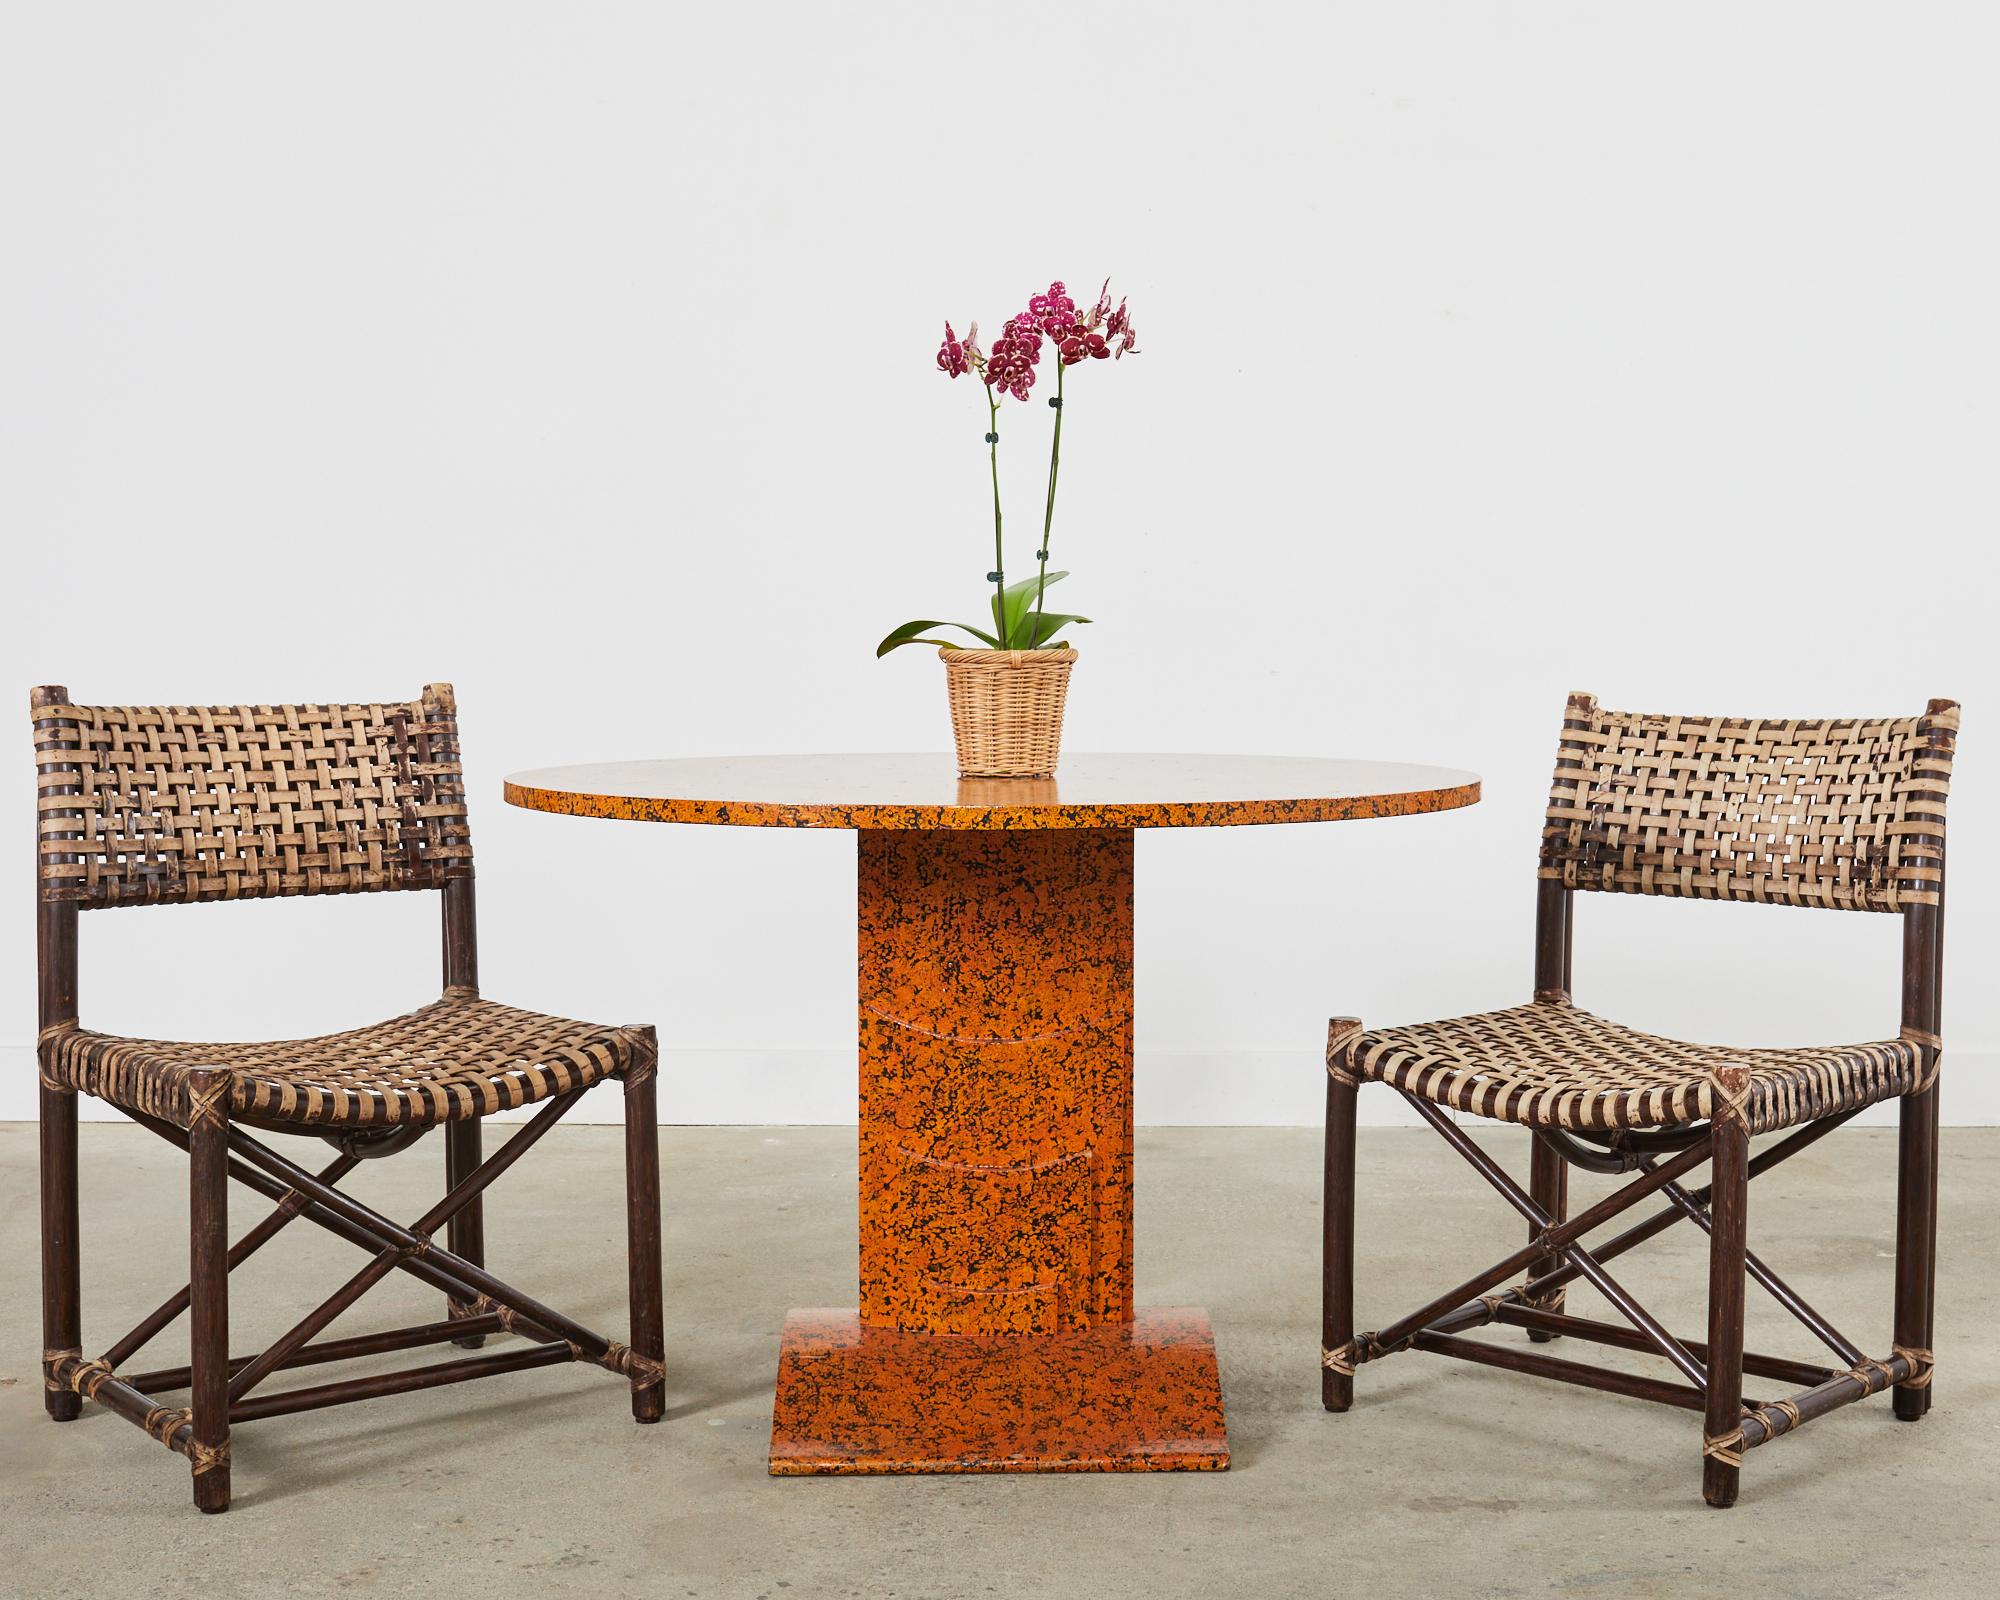 Whimsical lacquer speckled tilt-top center table or dining table by artist Ira Yeager (American 1938-2022). The table features a 1 inch thick round top that folds down. The top is supported by a sculptural pedestal ending with a curved, wide, flat